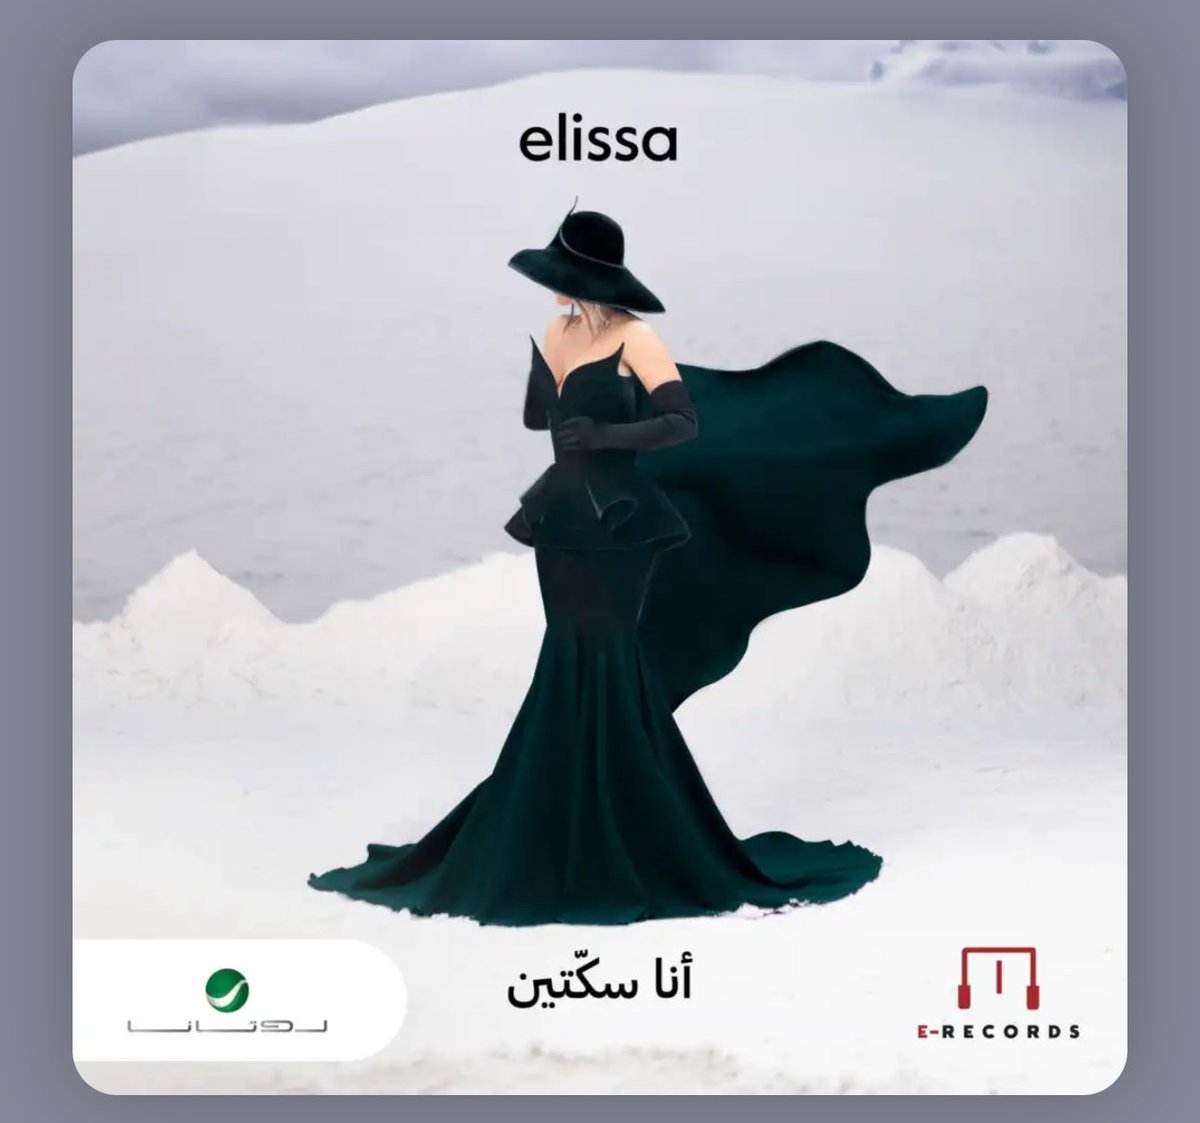 Every delay holds a blessing (بكل تأخيرة خيرة) & with this one, it brings a finally released piece of art created with great songs, amazing lyrics, and the sensational voice of passion, @elissakh 👏 Congratulations on your new album my friend ❤️ #انا_سكتين